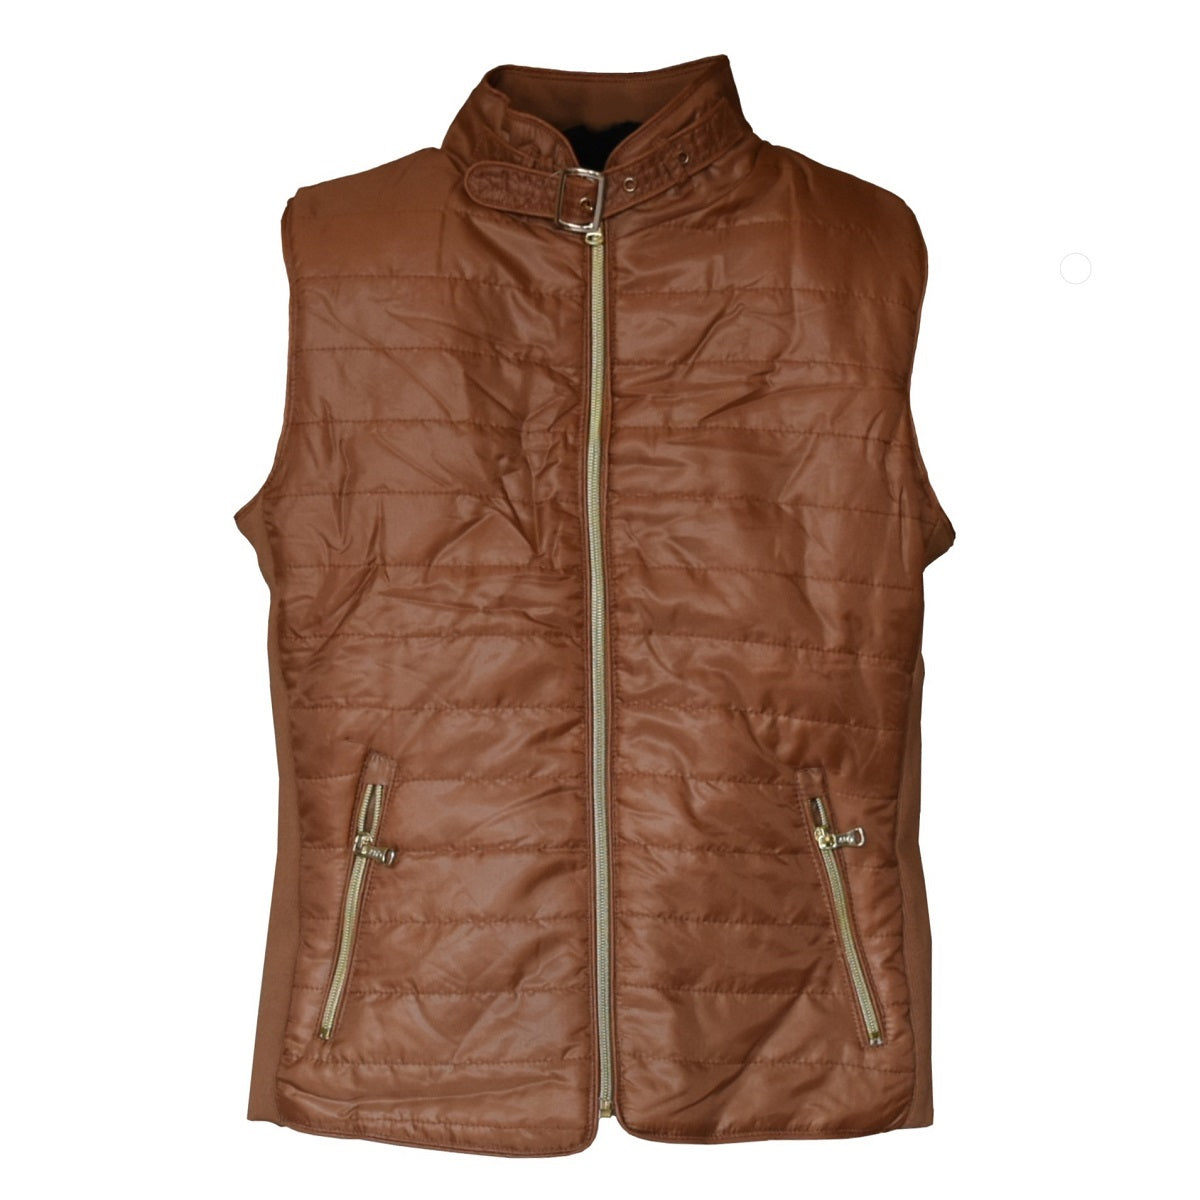 Chaleco para Mujer - TM-VH-185 Vest for Women